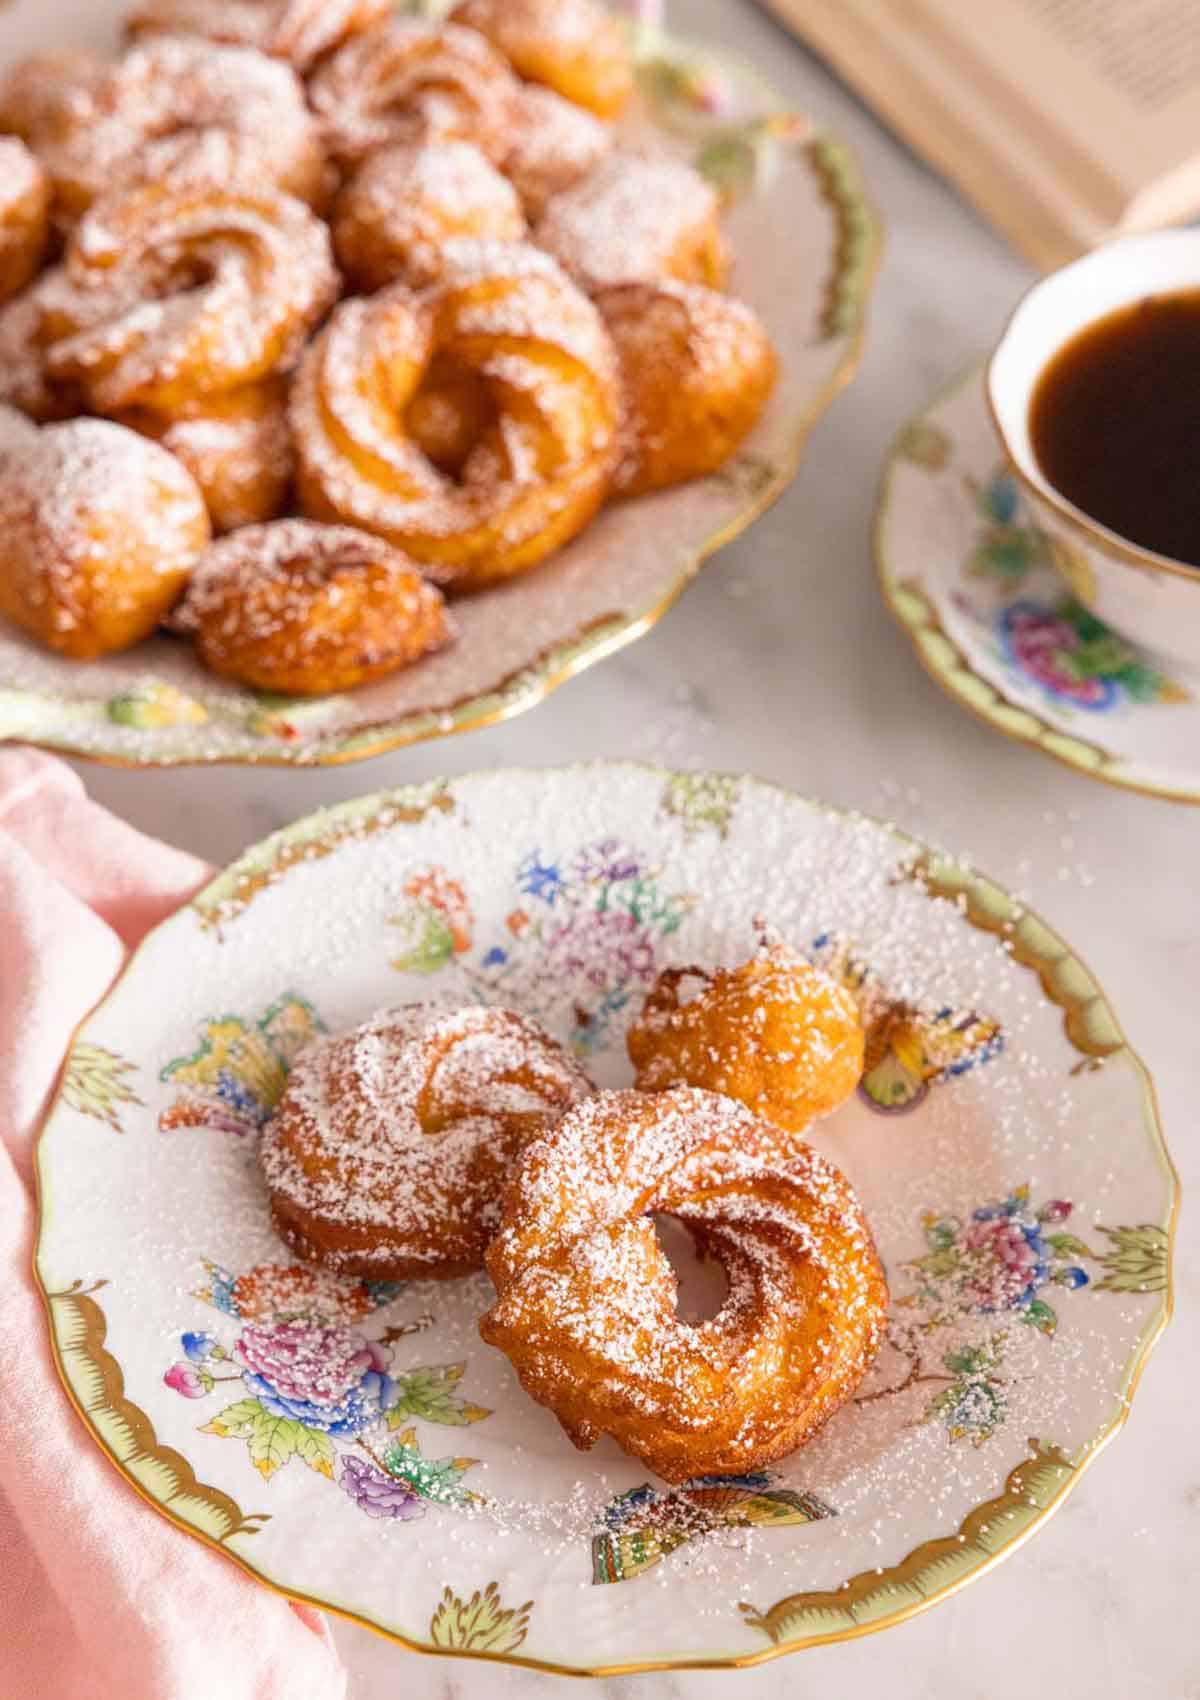 A plate of zeppole with more in the back with powdered sugar dusted on top.